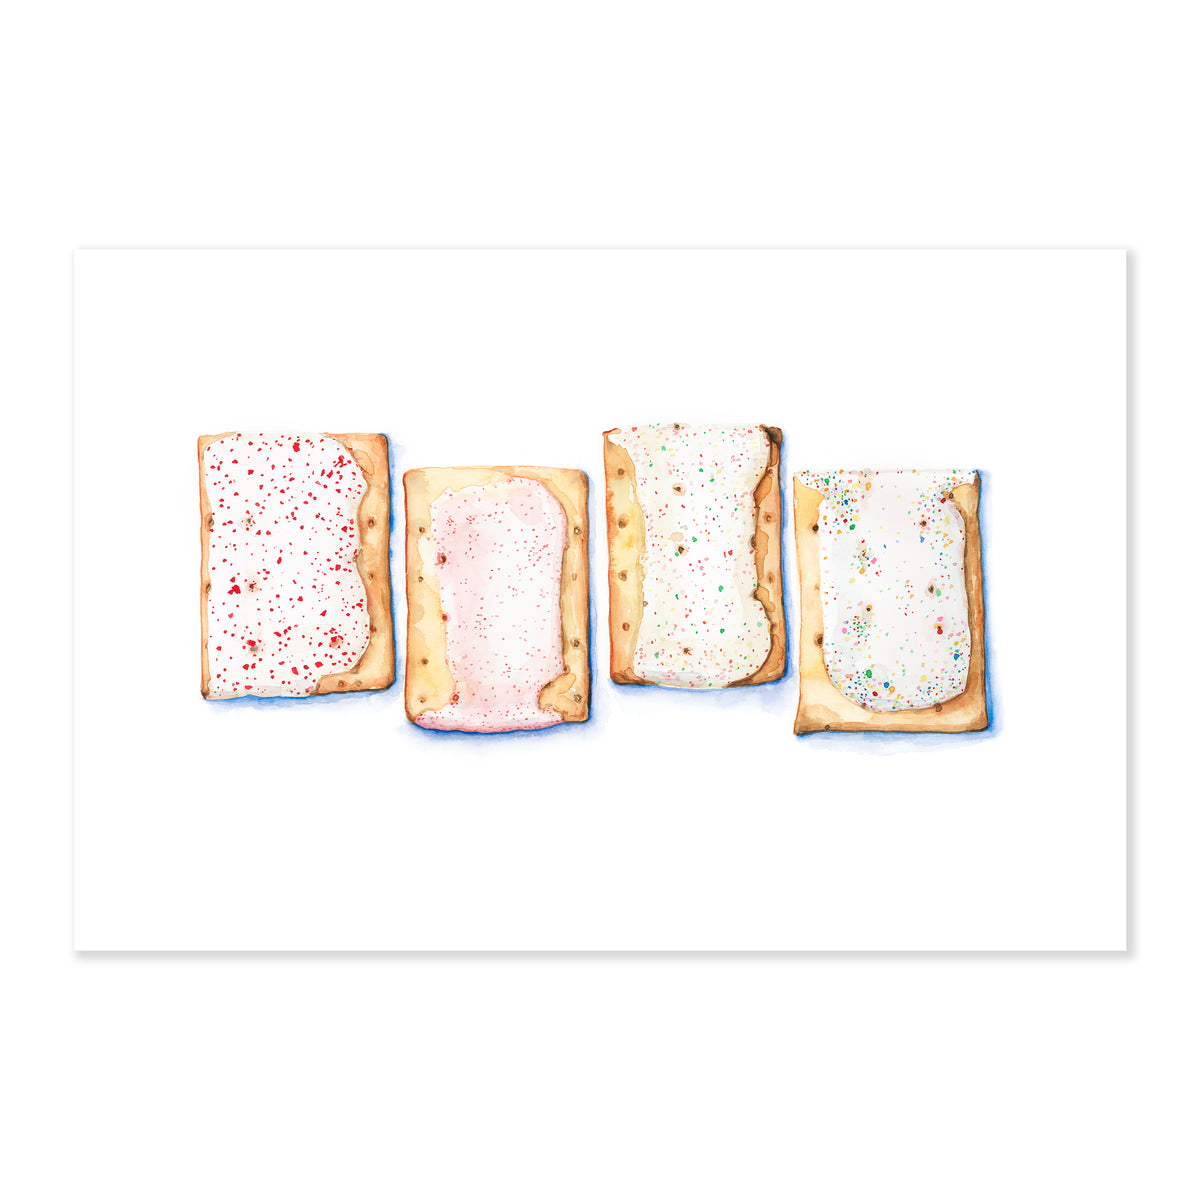 A fine art print illustrating 4 pop tarts with pink and white frosting painted using watercolors on a soft white background